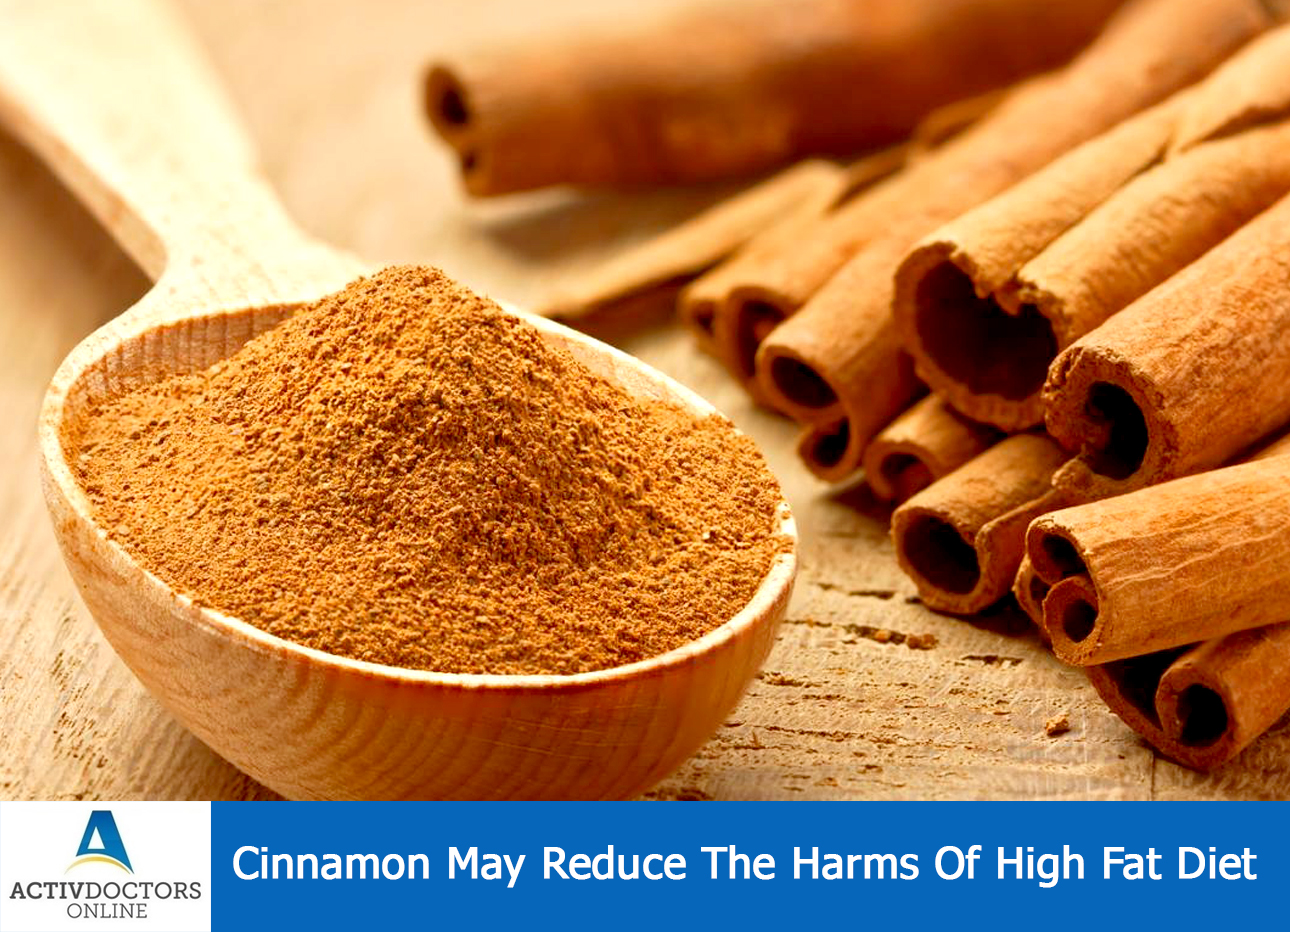 Cinnamon May Reduce The Harms Of High Fat Diet